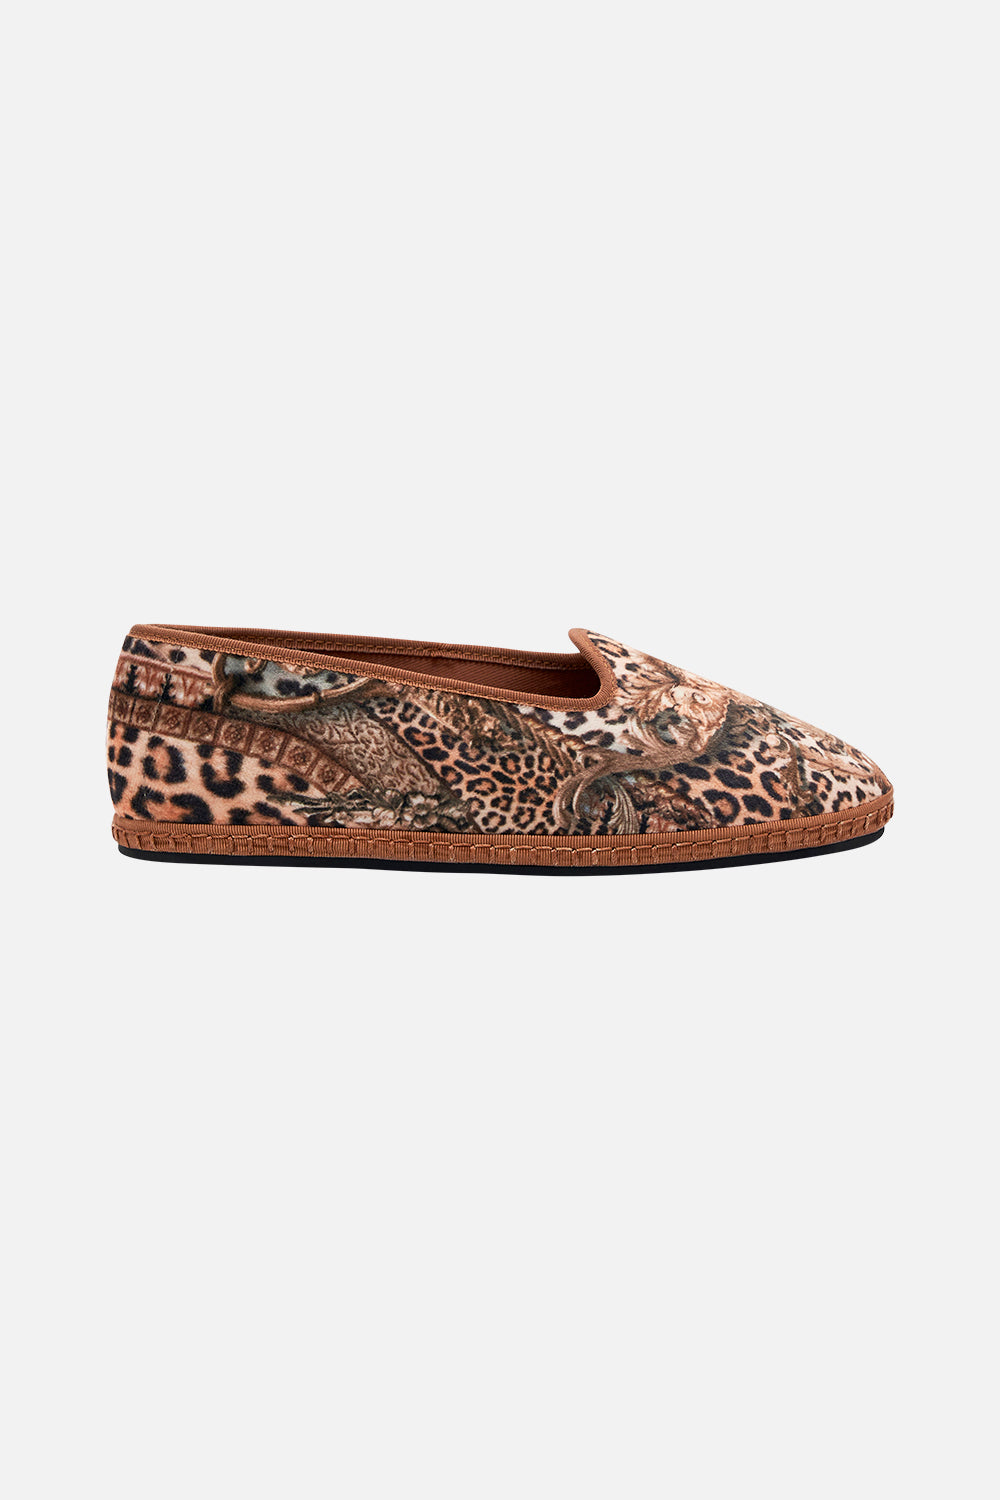 Product view of CAMILLA leopard print slipper in Standing Ovation print 